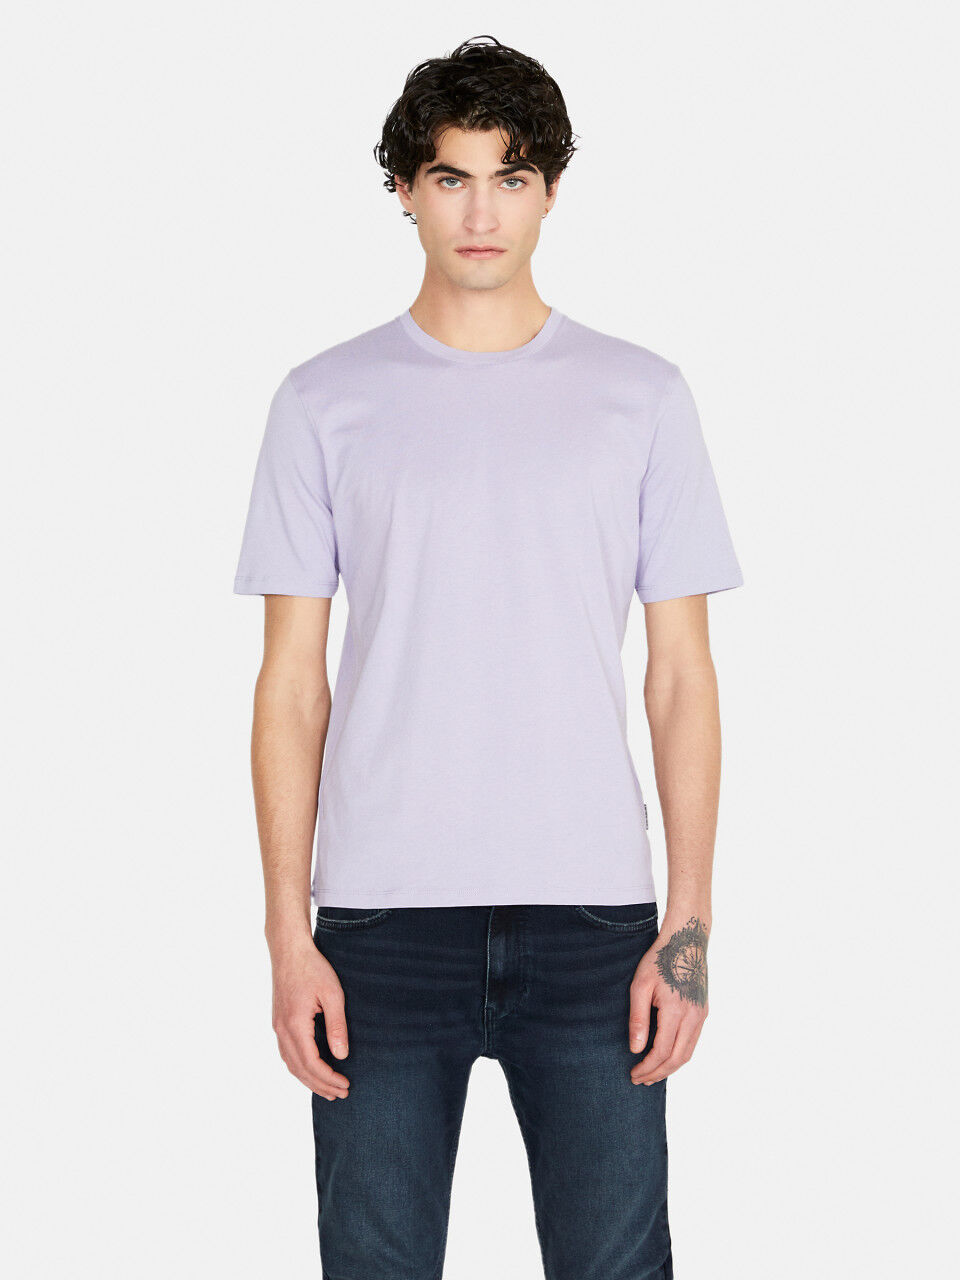 Solid colored t-shirt